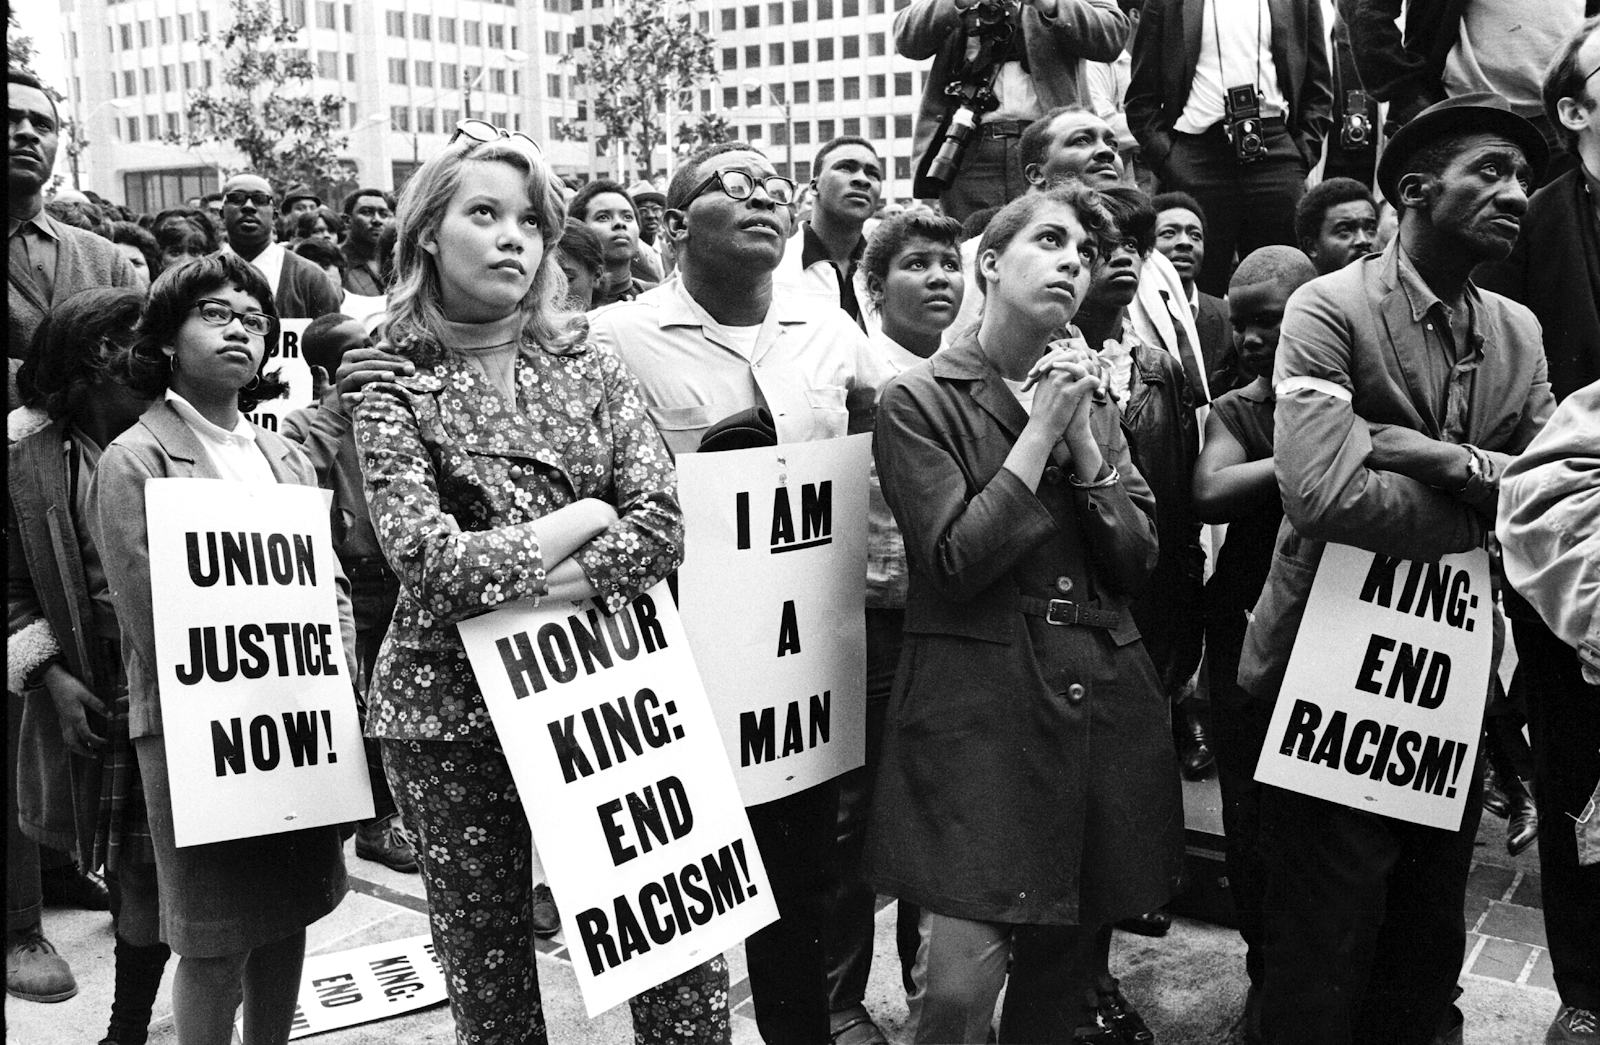 5 Images Of Civil Rights Protests In The #39 60s That Are Eerily Similar